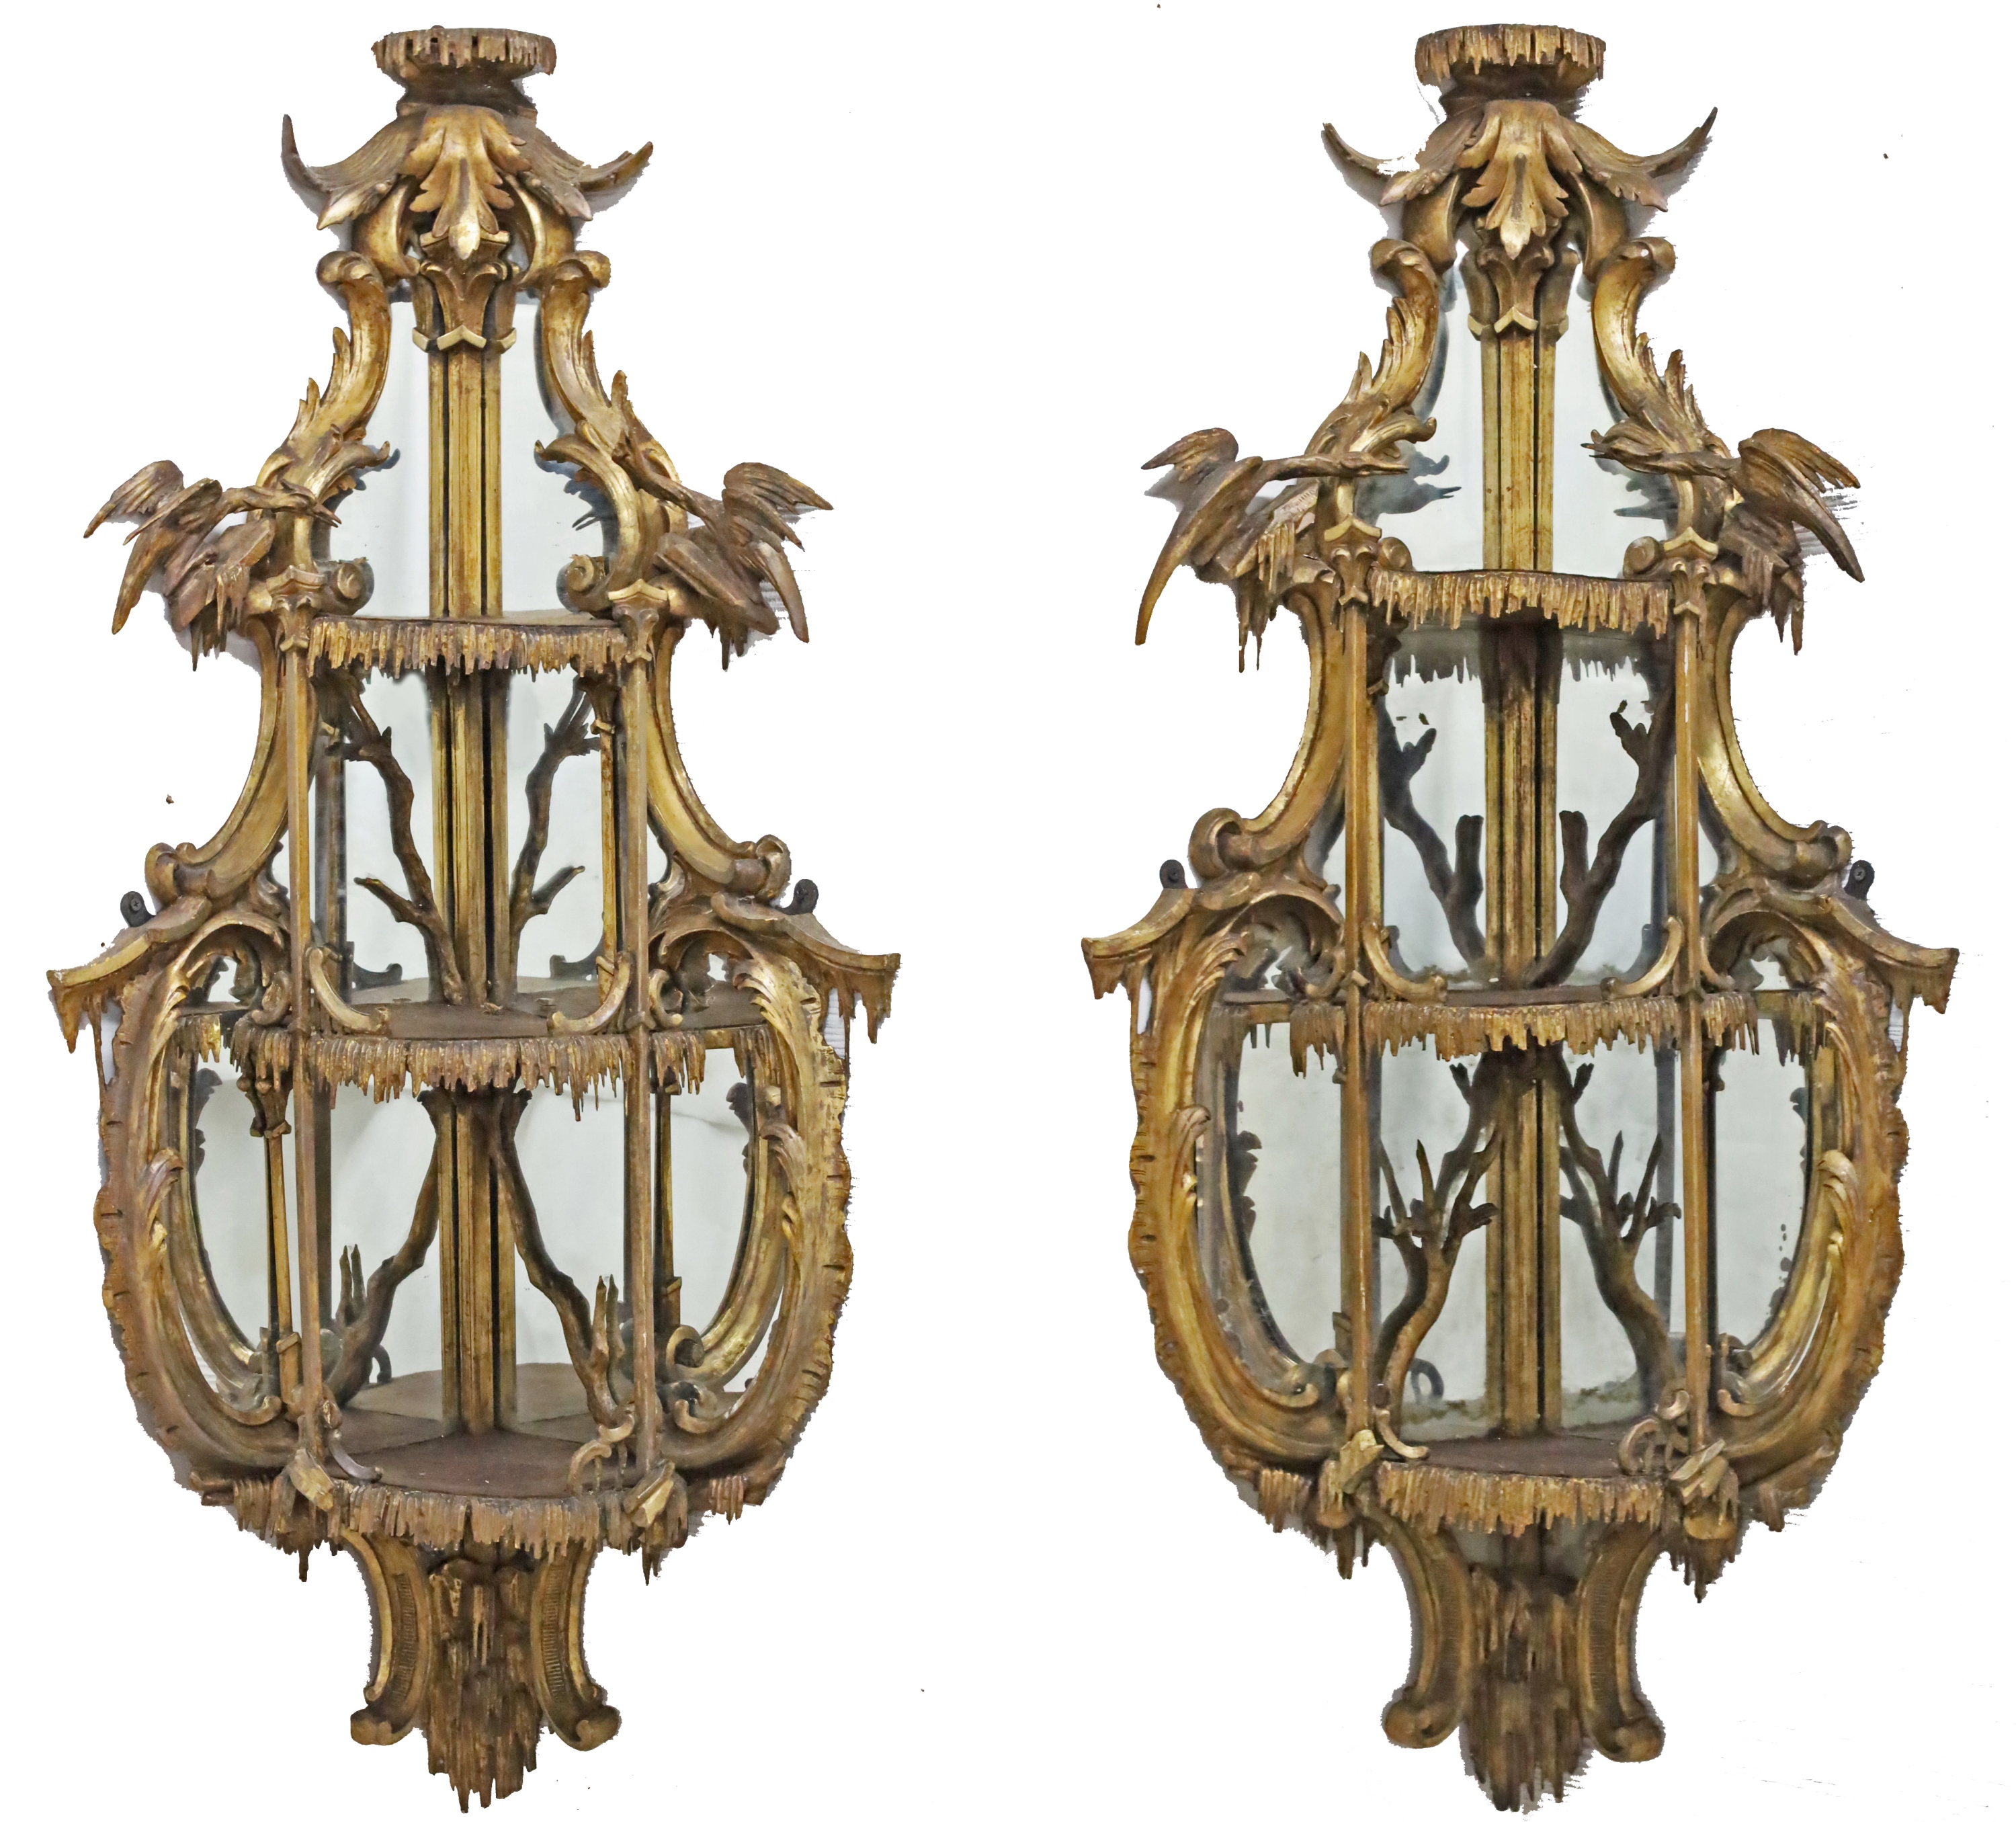 PR OF EARLY 19TH C ENGLISH MIRRORED 2a596a